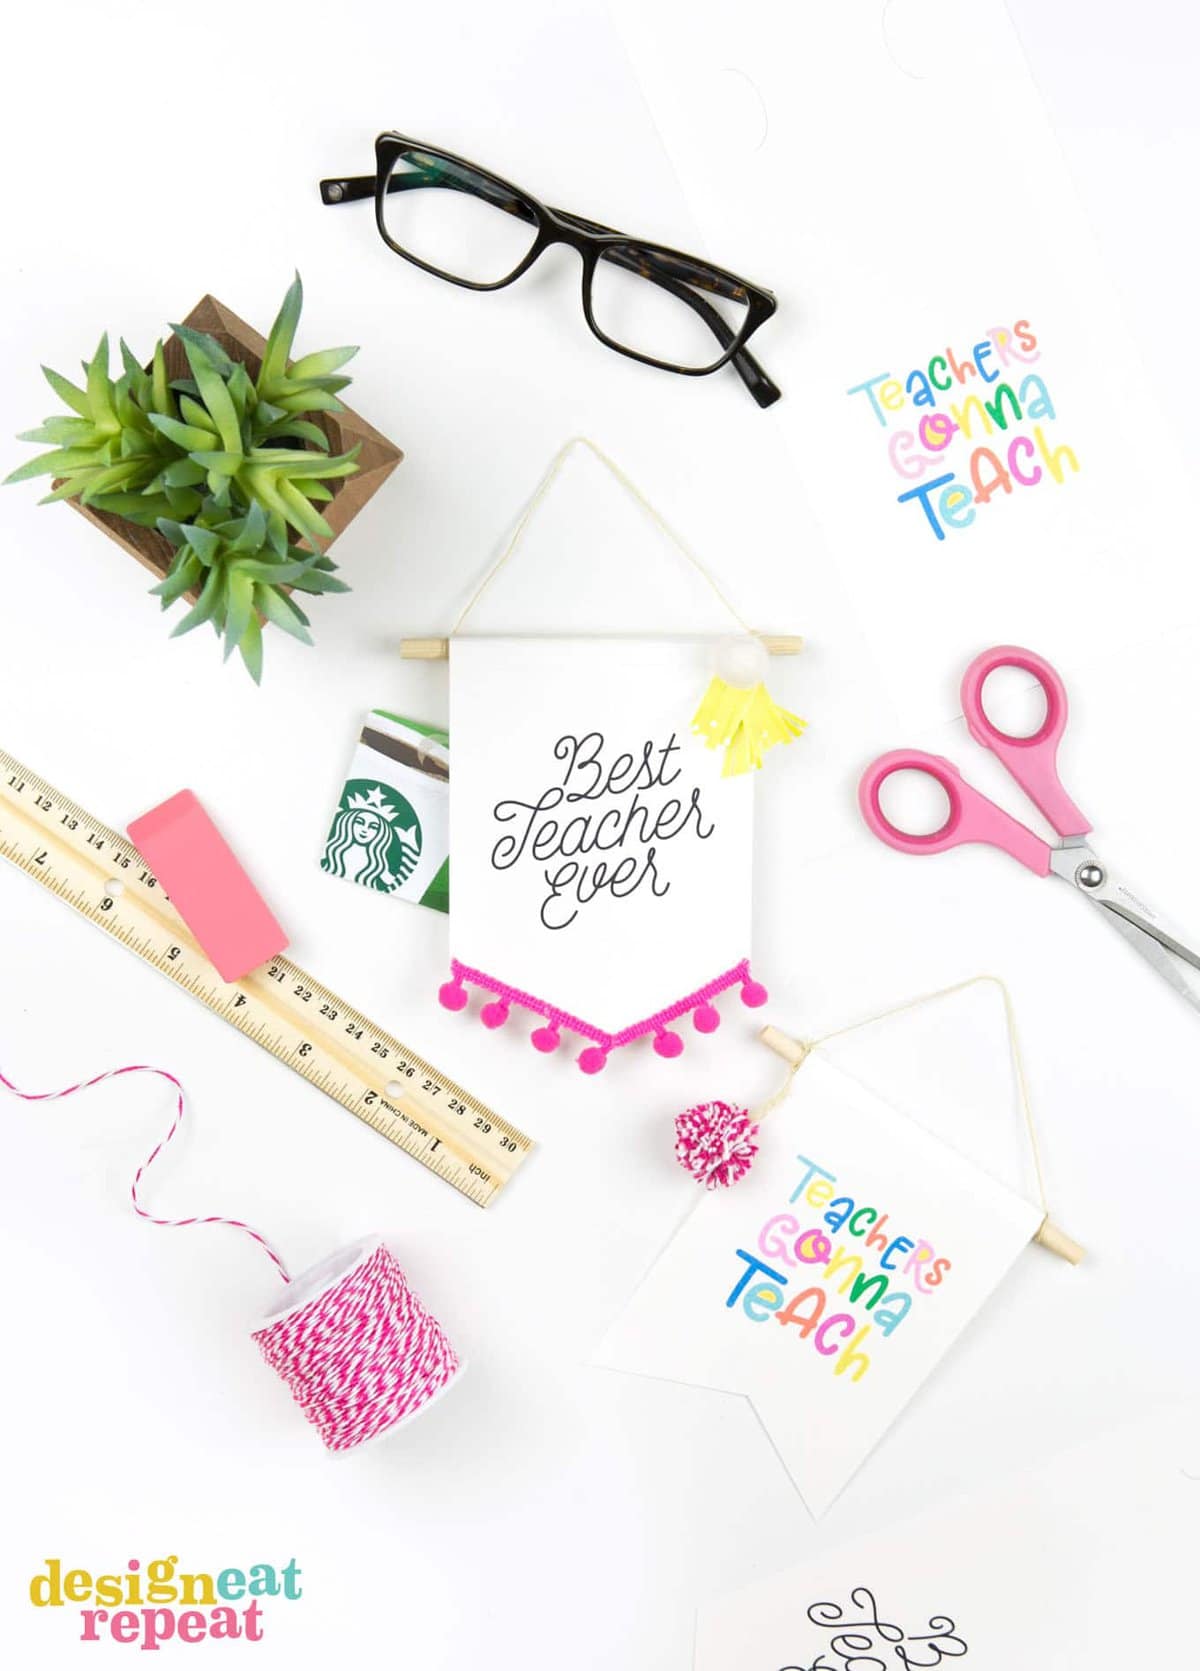 A roundup of 8 cute (and free!) Printable Teacher Gift Ideas!